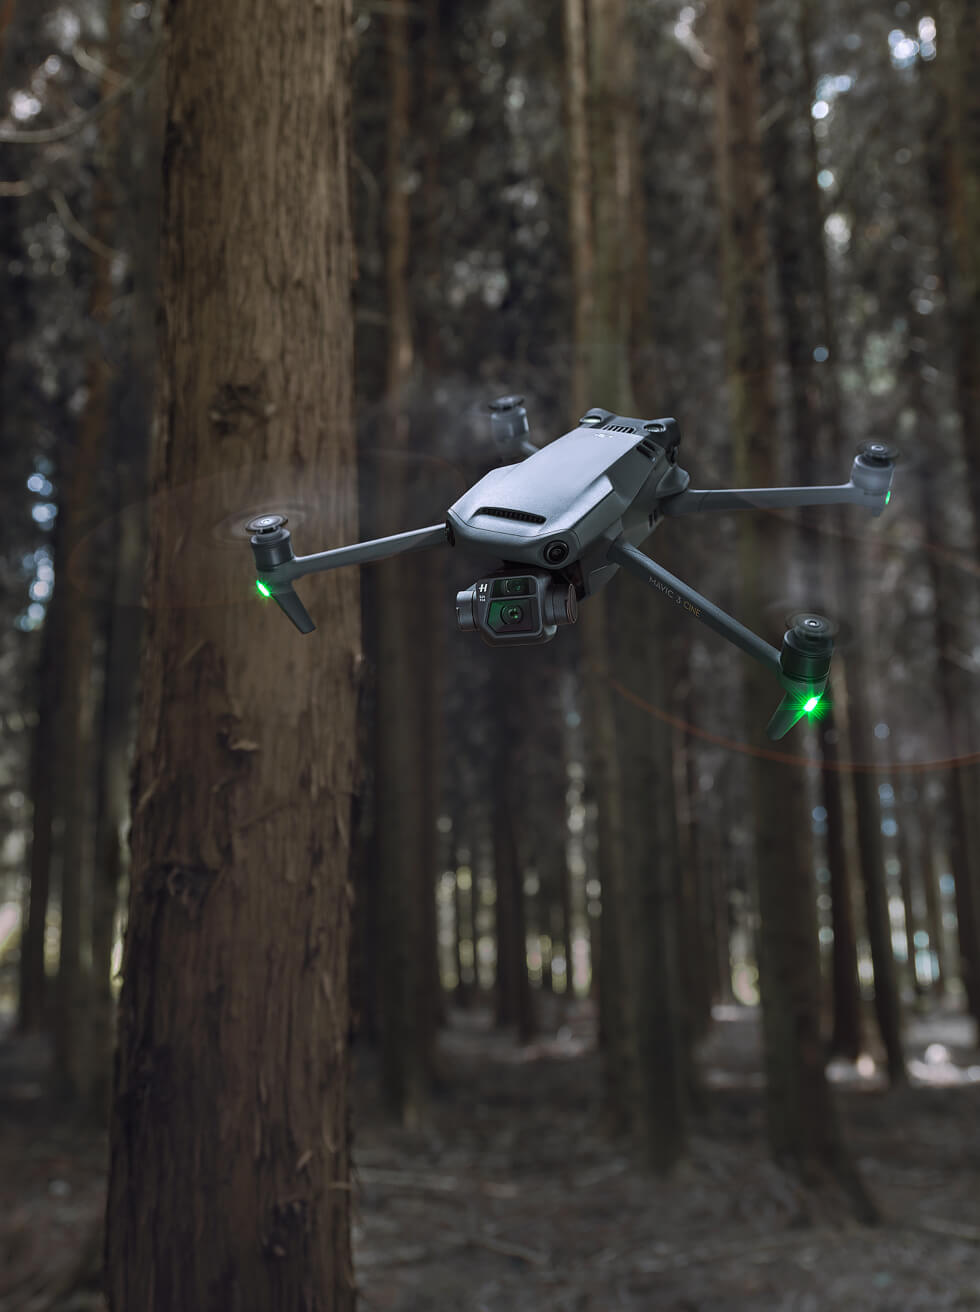 What You Should Know About Drones With Cameras
